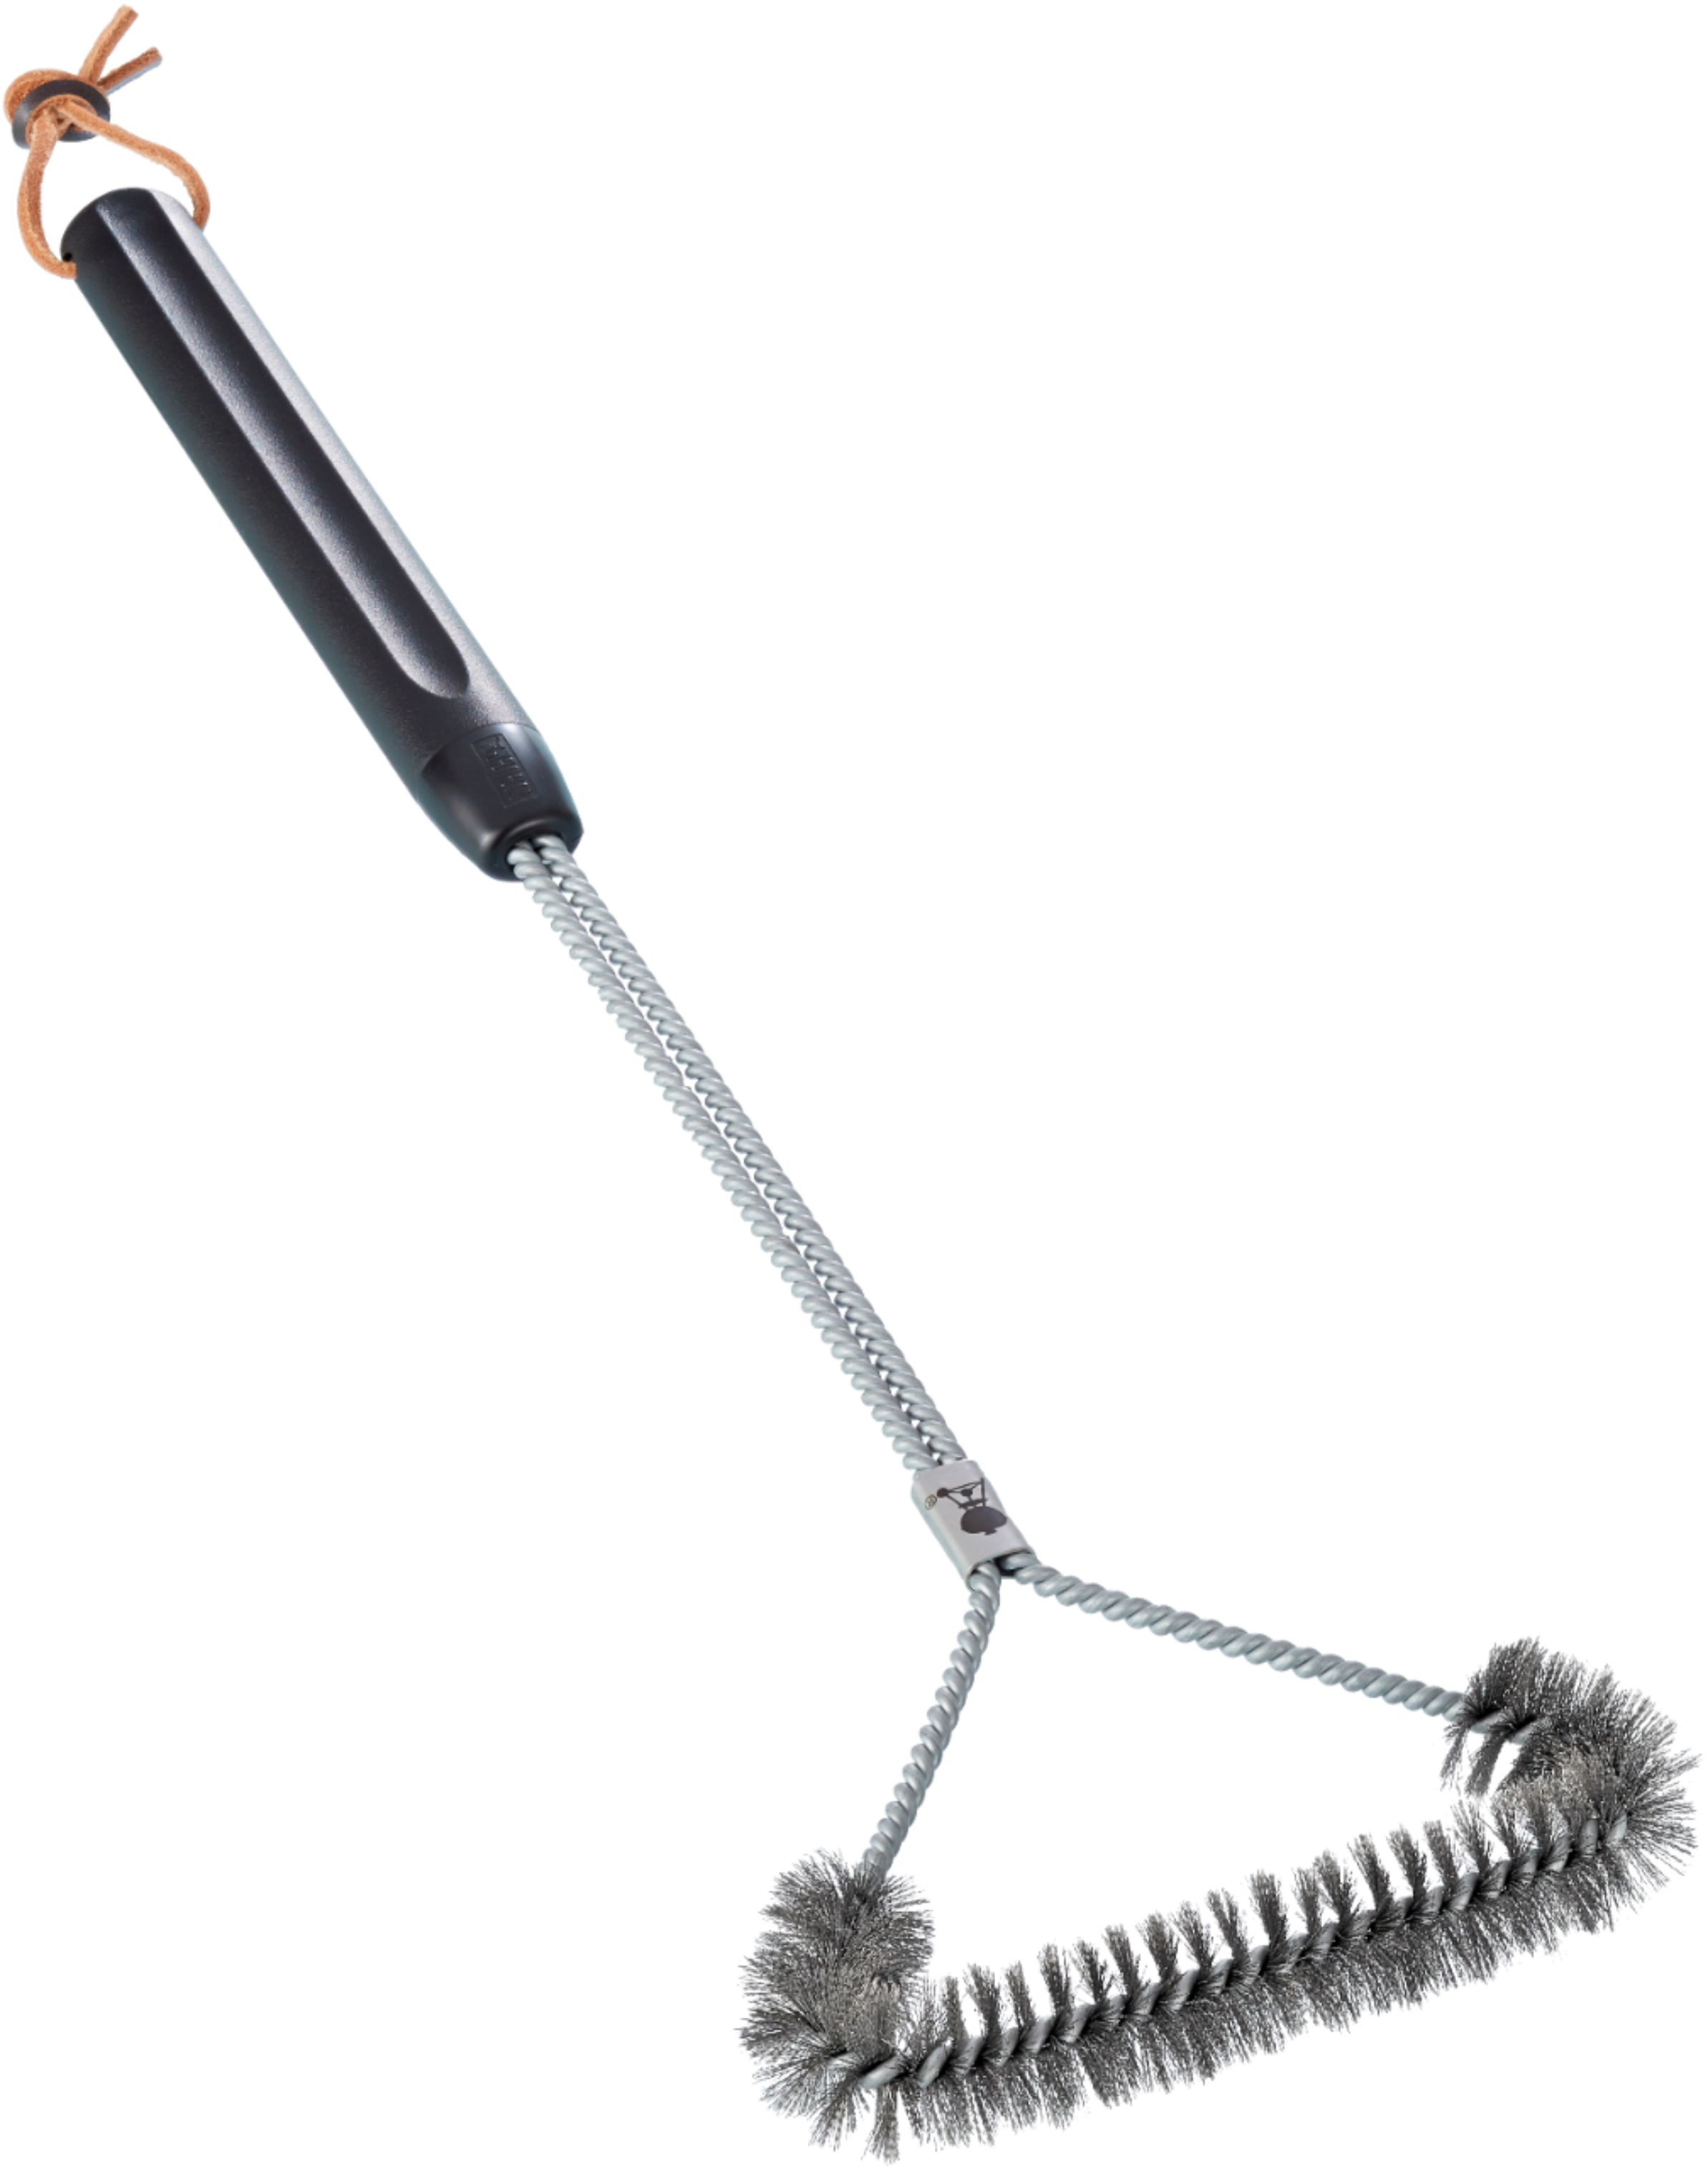 21 in three-sided grill brush 